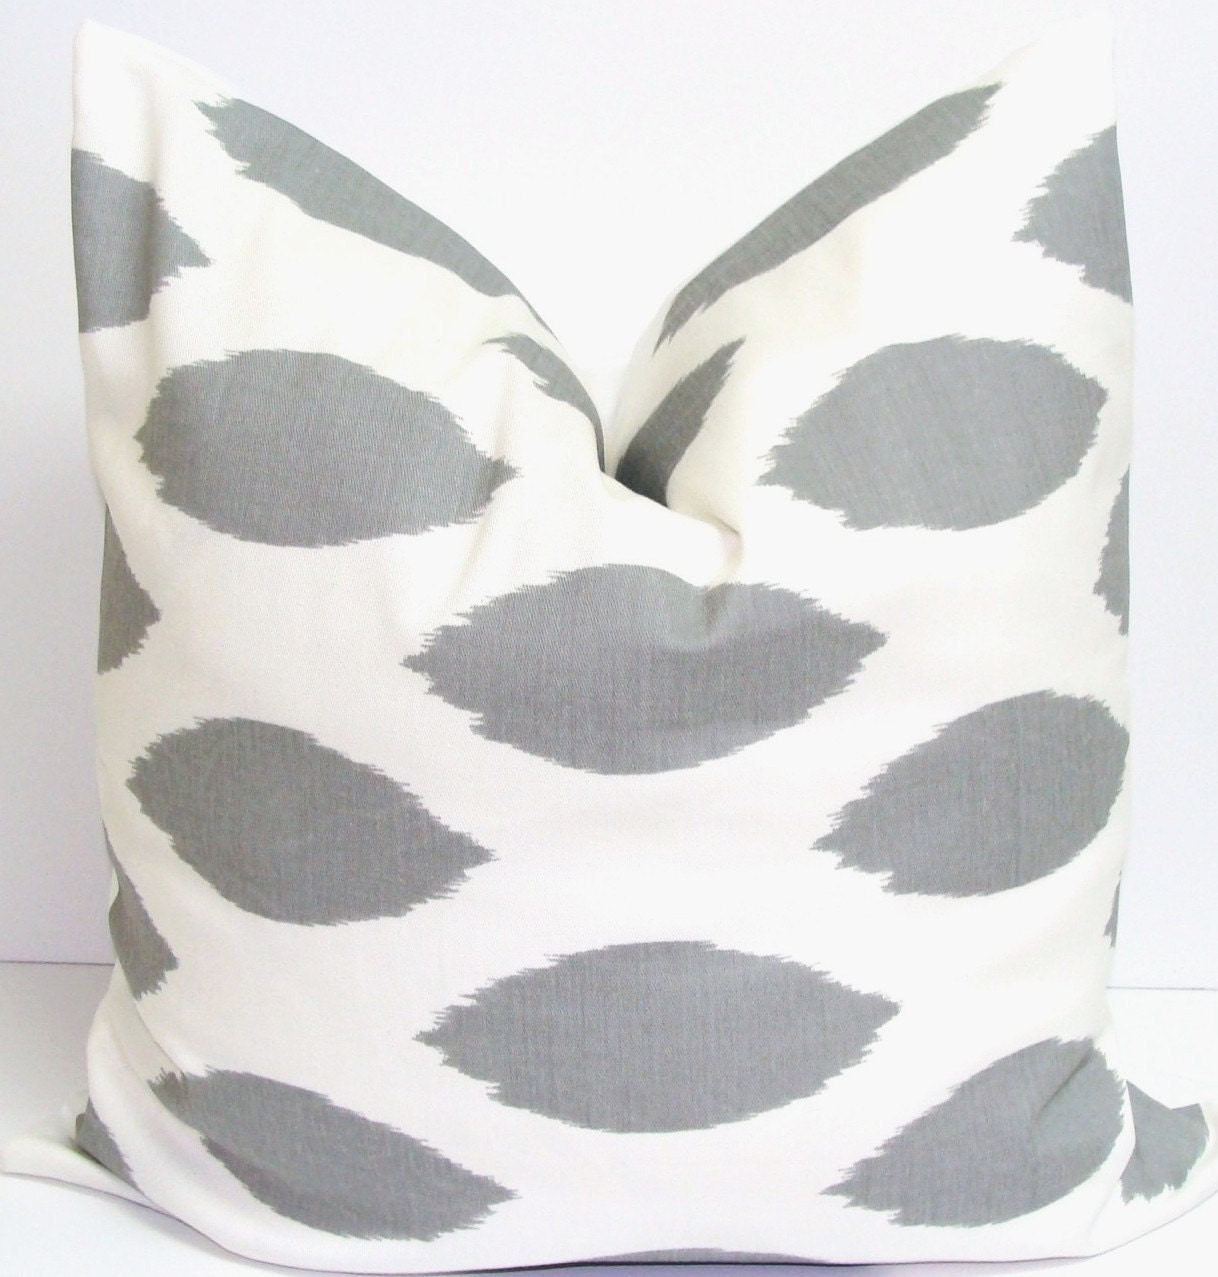 Charcoal Gray Pillow.16x16 inch.Pillow Cover.Printed Fabric Front and Back.Spotted Pillow.Ikat Pillow